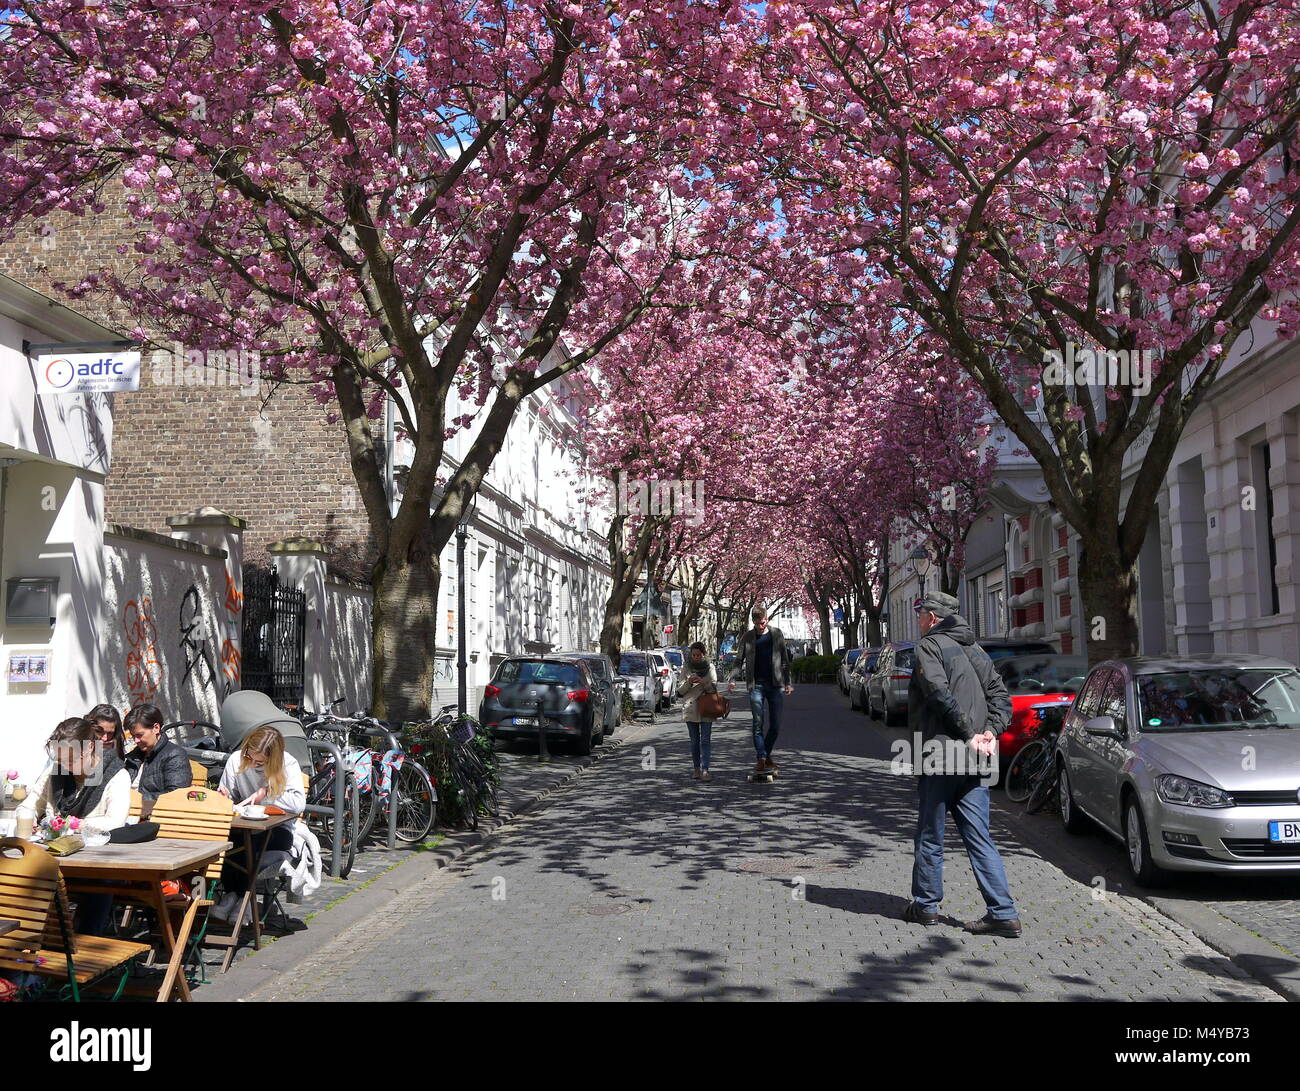 BONN, GERMANY - APRIL 18, 2016: People walking under rows of cherry blossoms sakura trees in Bonn, former capital of Germany on a beautiful sunny day Stock Photo